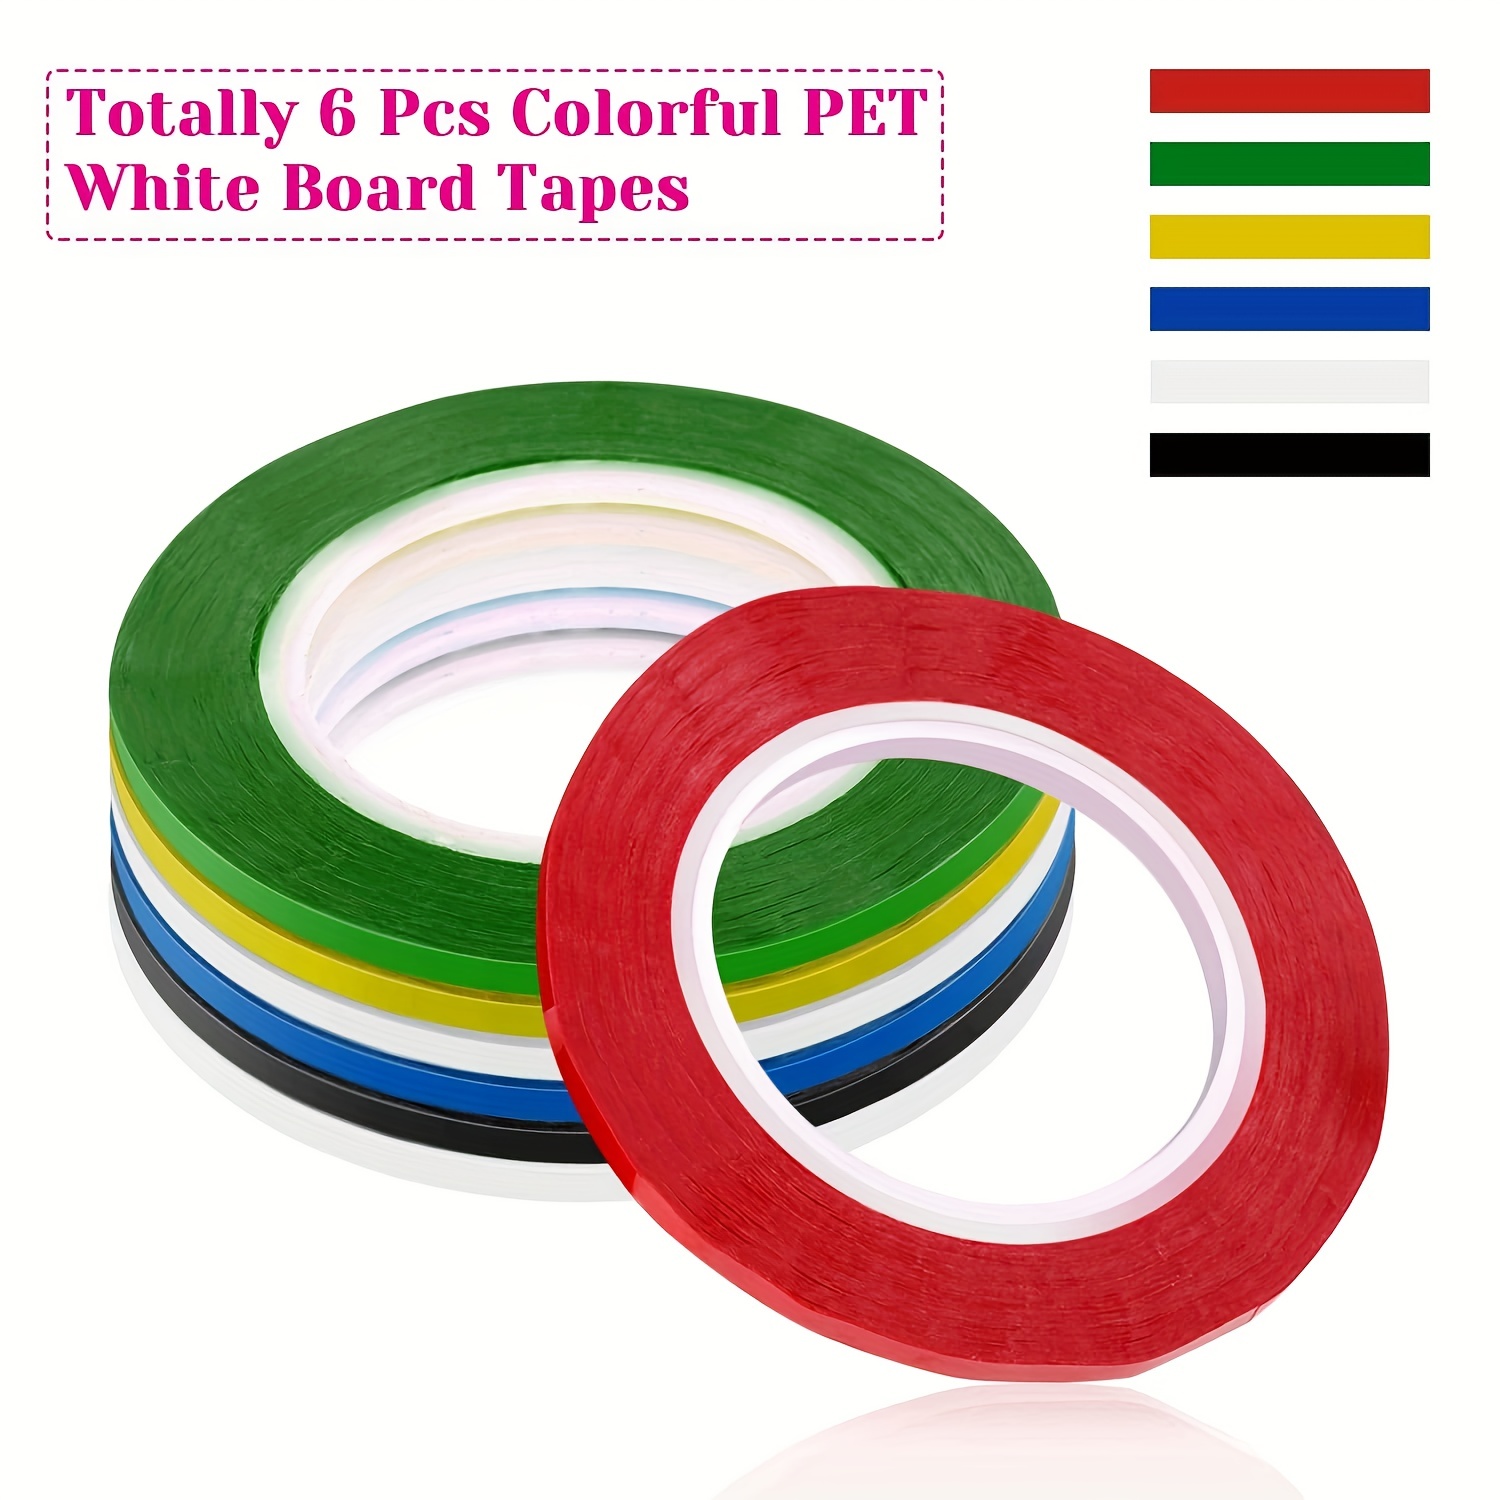 12 Pack Black Thin Tape for Dry Erase Board Whiteboard Accessories Striping  Tape